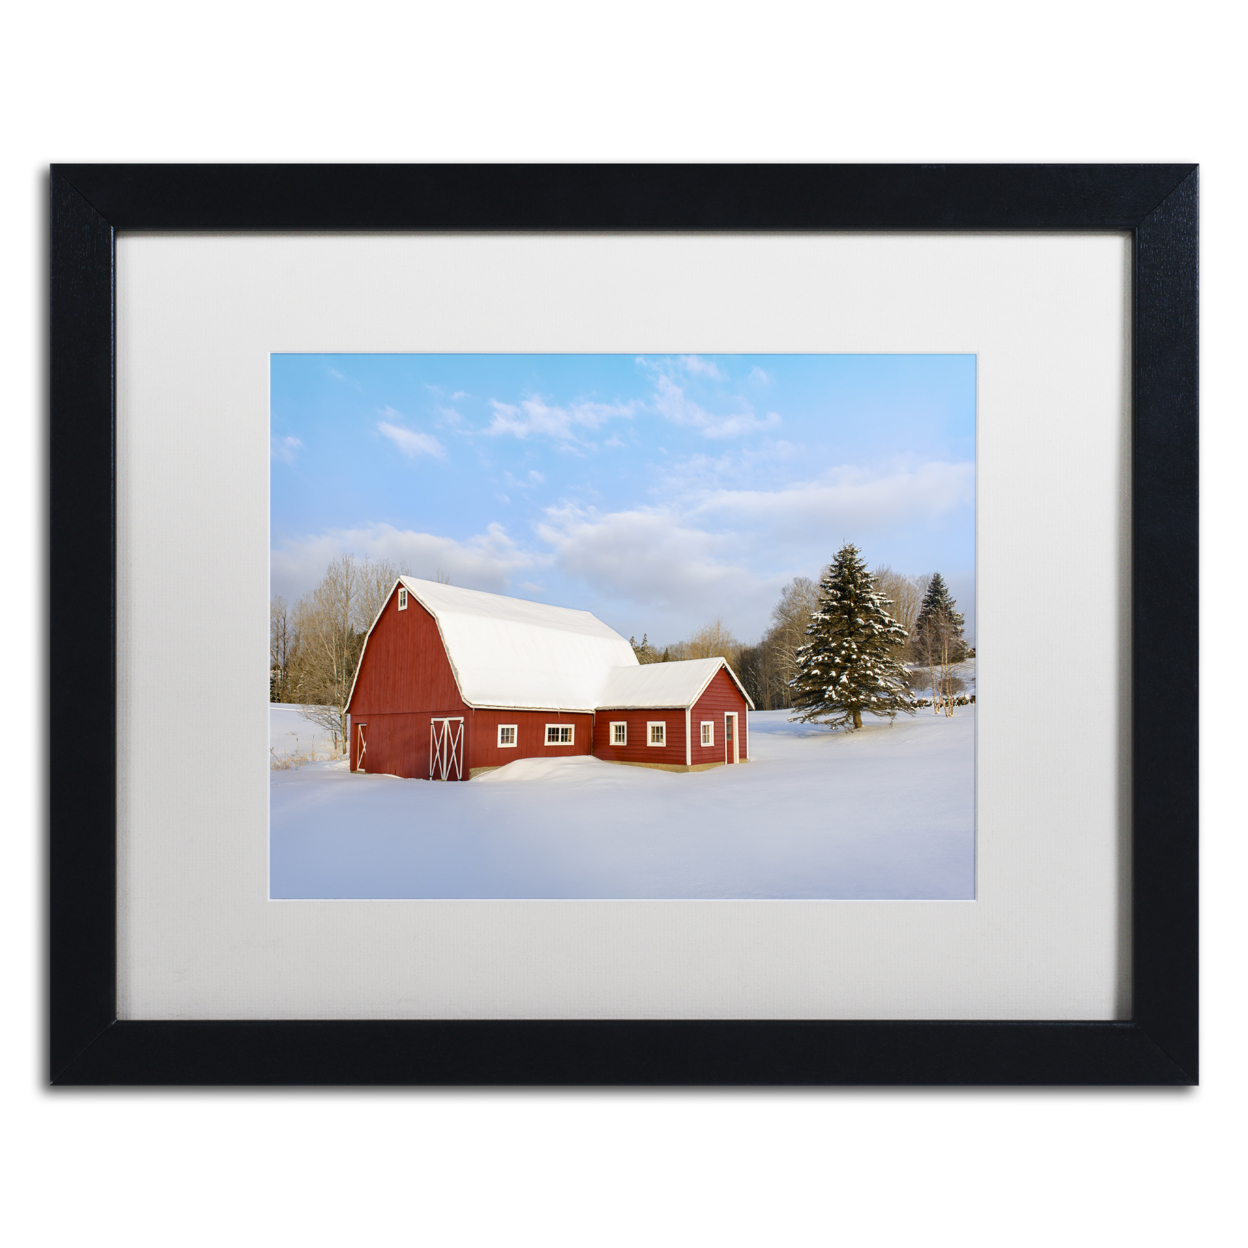 Michael Blanchette Photography 'Red Barn In Snow' Black Wooden Framed Art 18 X 22 Inches